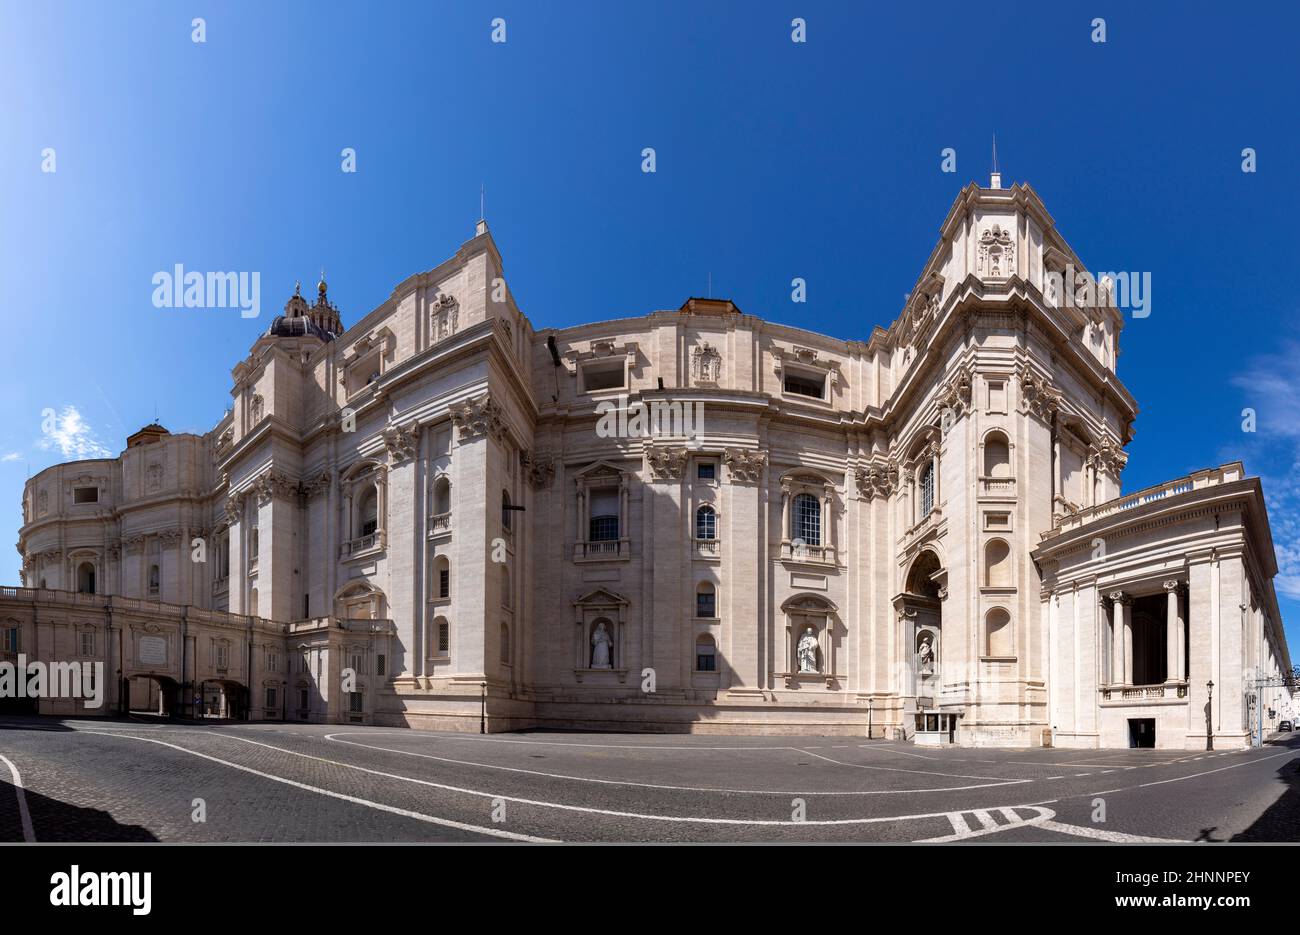 St. Peter's square with the vatican buildings arranged by Michelangelo without people. Stock Photo